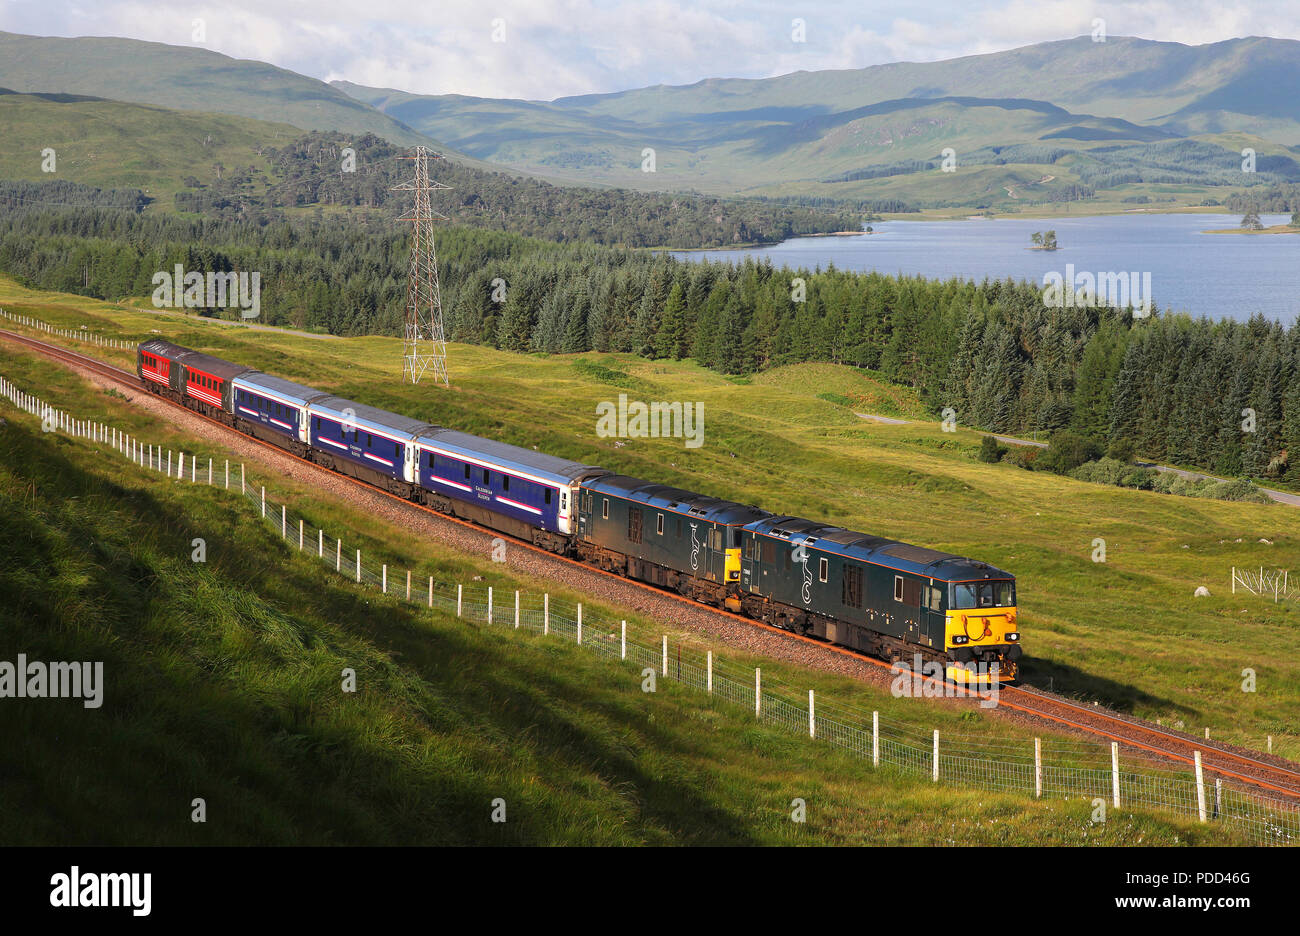 73966 & 73968 heads the Caledonian sleeper  past Achallader on the West Highland Railway 1.8.16 Stock Photo